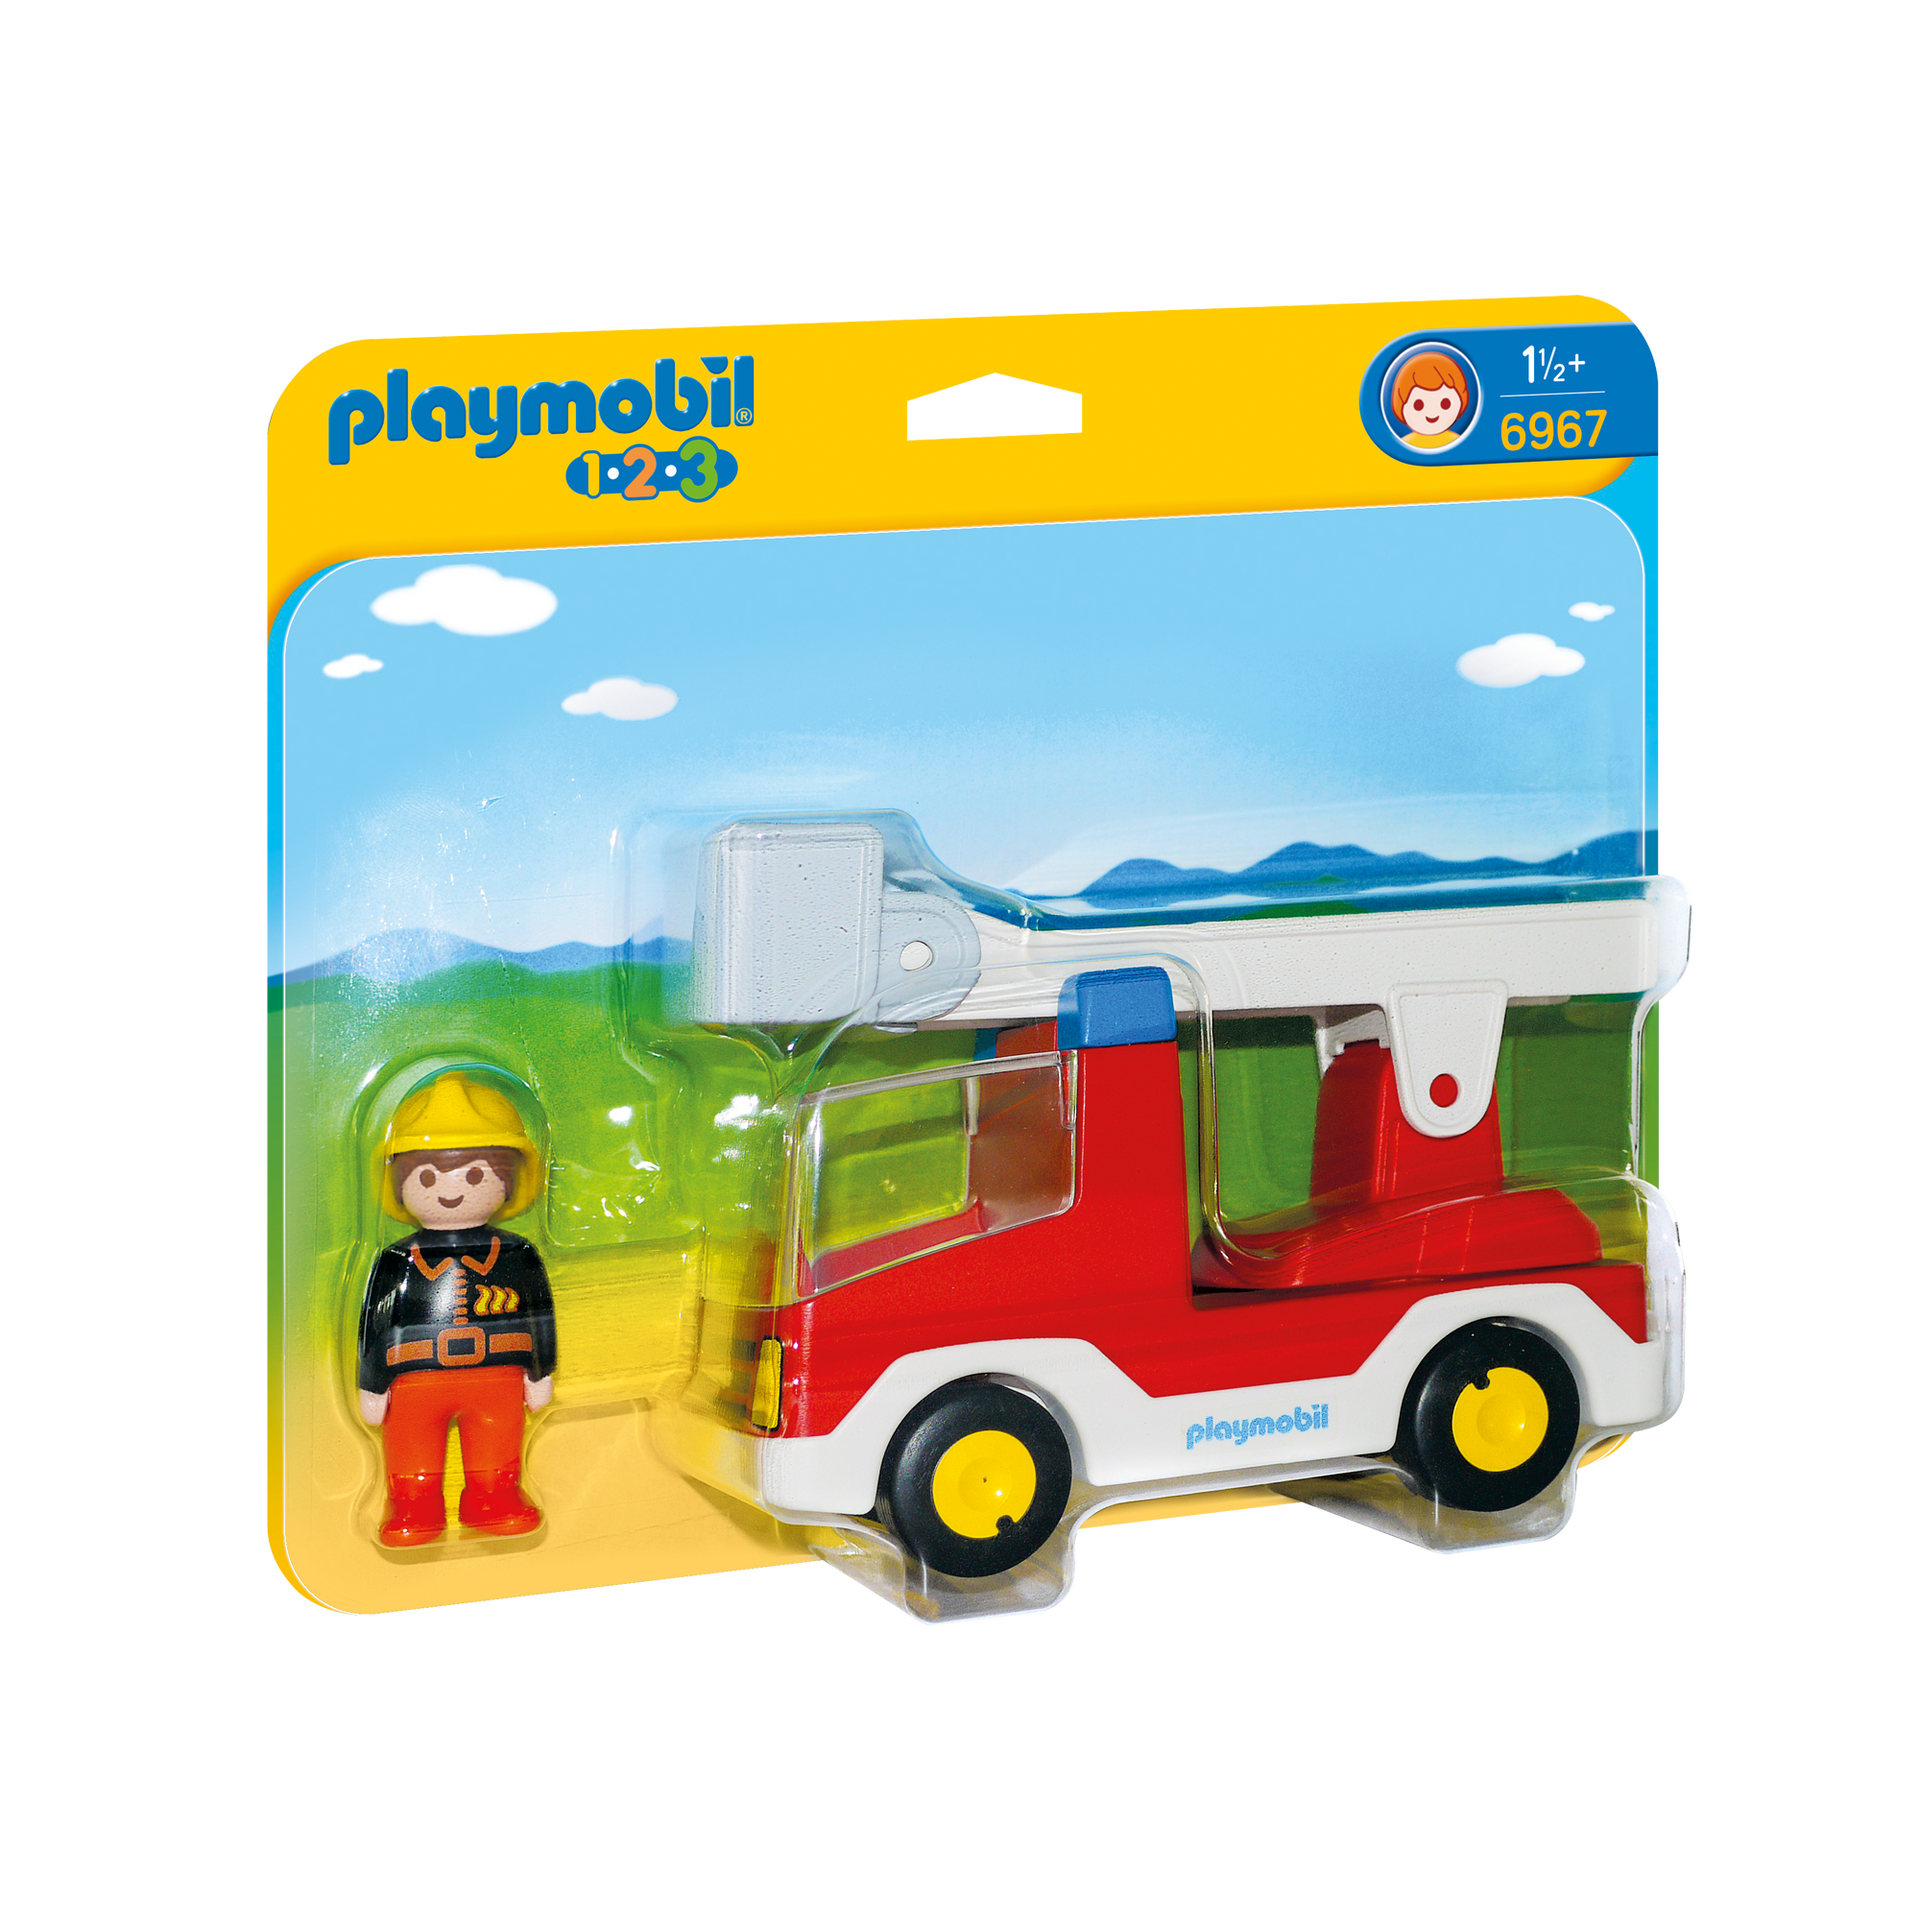 Playmobil: Family Bicycle – Rhen's Nest Toy Shop